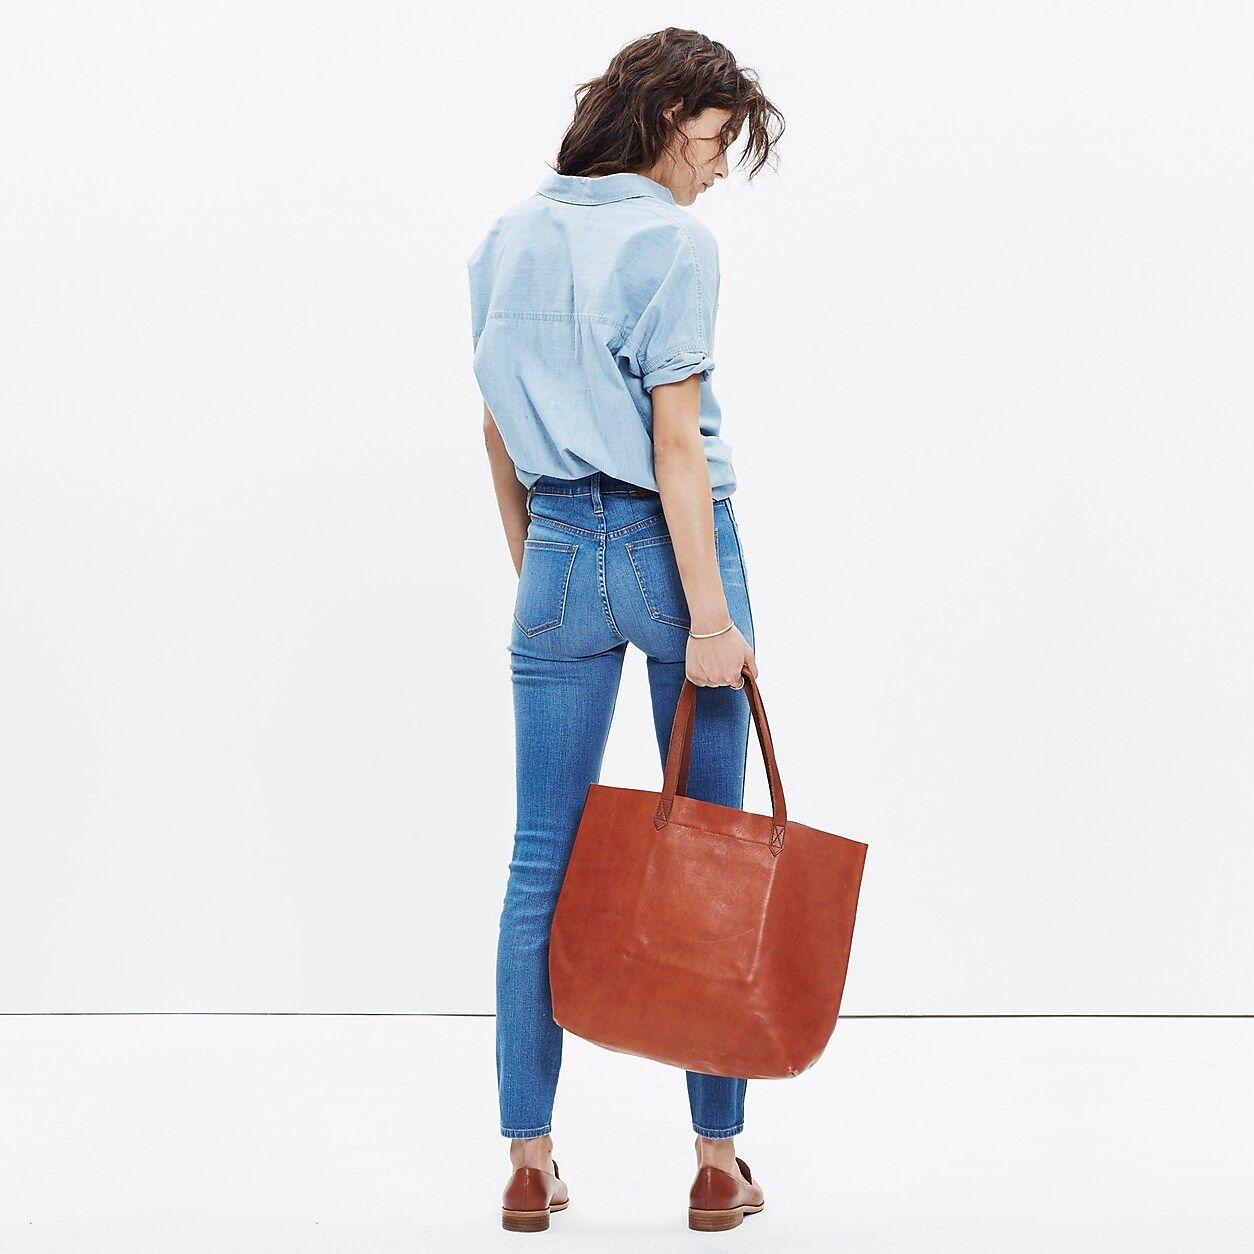 The Madewell Transport tote | J.Crew US